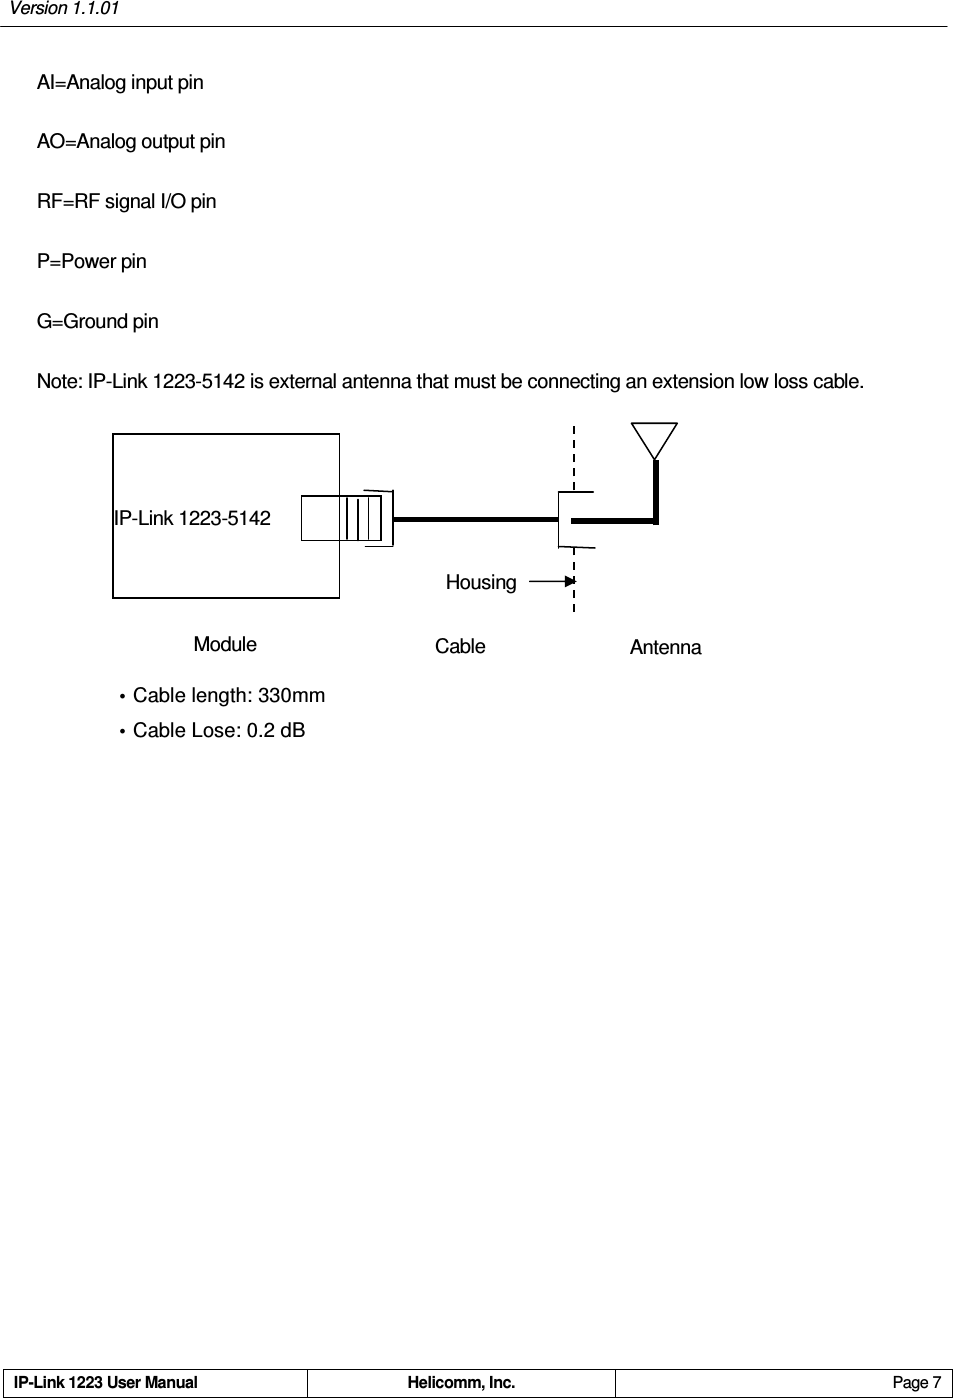 Version 1.1.01     IP-Link 1223 User Manual  Helicomm, Inc.  Page 7   AI=Analog input pin AO=Analog output pin RF=RF signal I/O pin P=Power pin G=Ground pin Note: IP-Link 1223-5142 is external antenna that must be connecting an extension low loss cable.   IP-Link 1223-5142 Module  Cable Antenna Housing  Cable length: 330mm  Cable Lose: 0.2 dB 